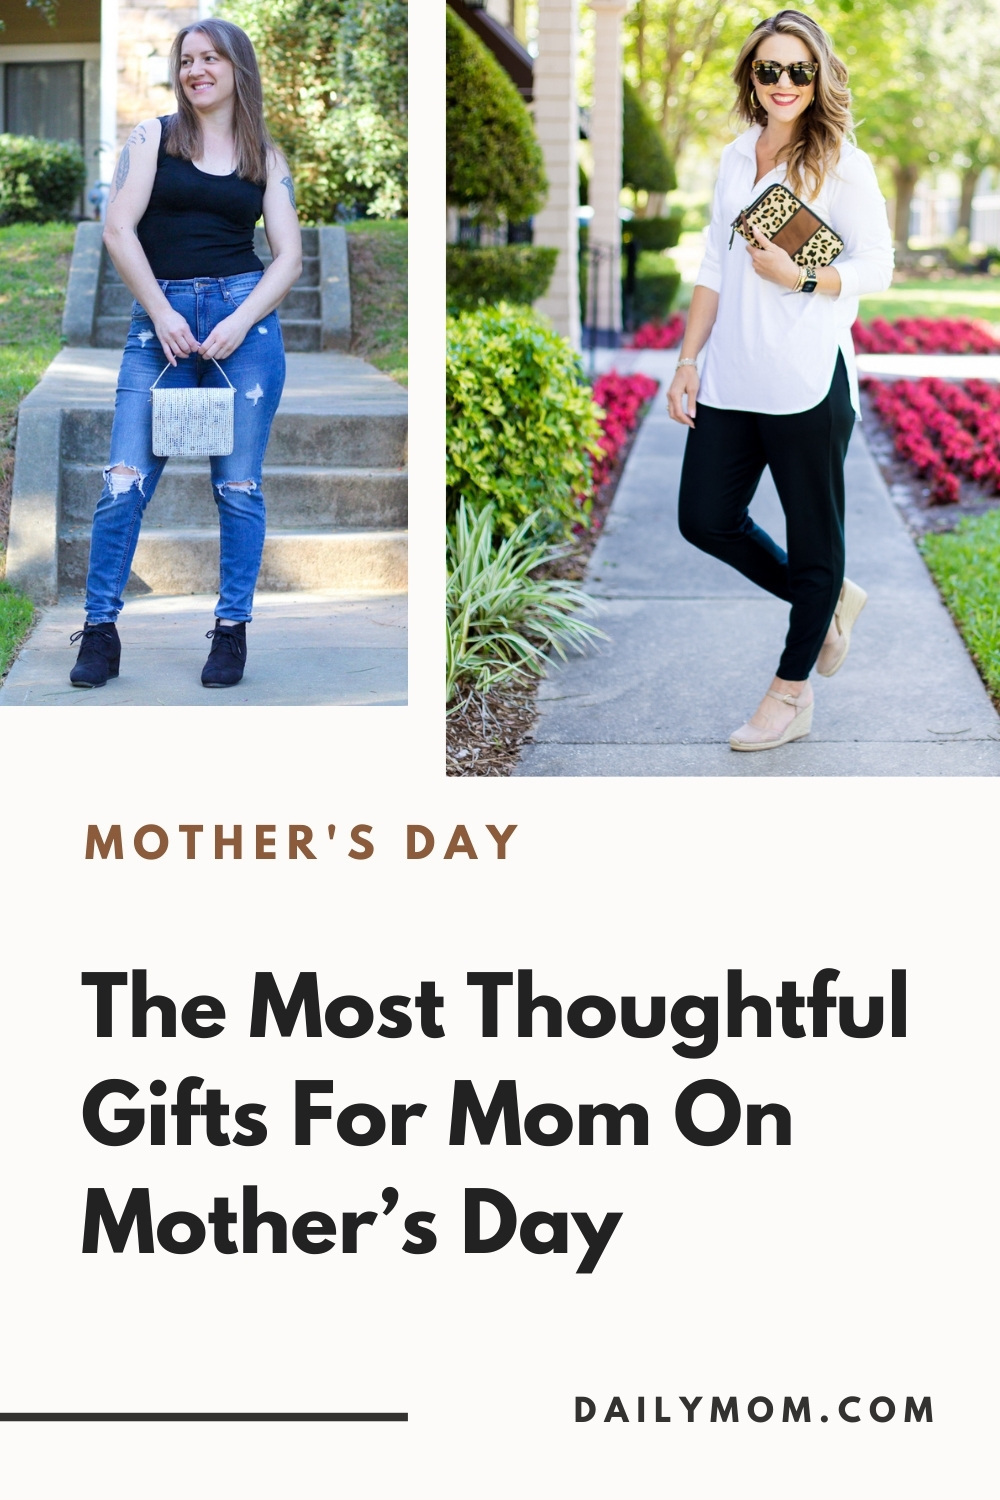 22 Truly Thoughtful Gifts For Mom On Mother’s Day